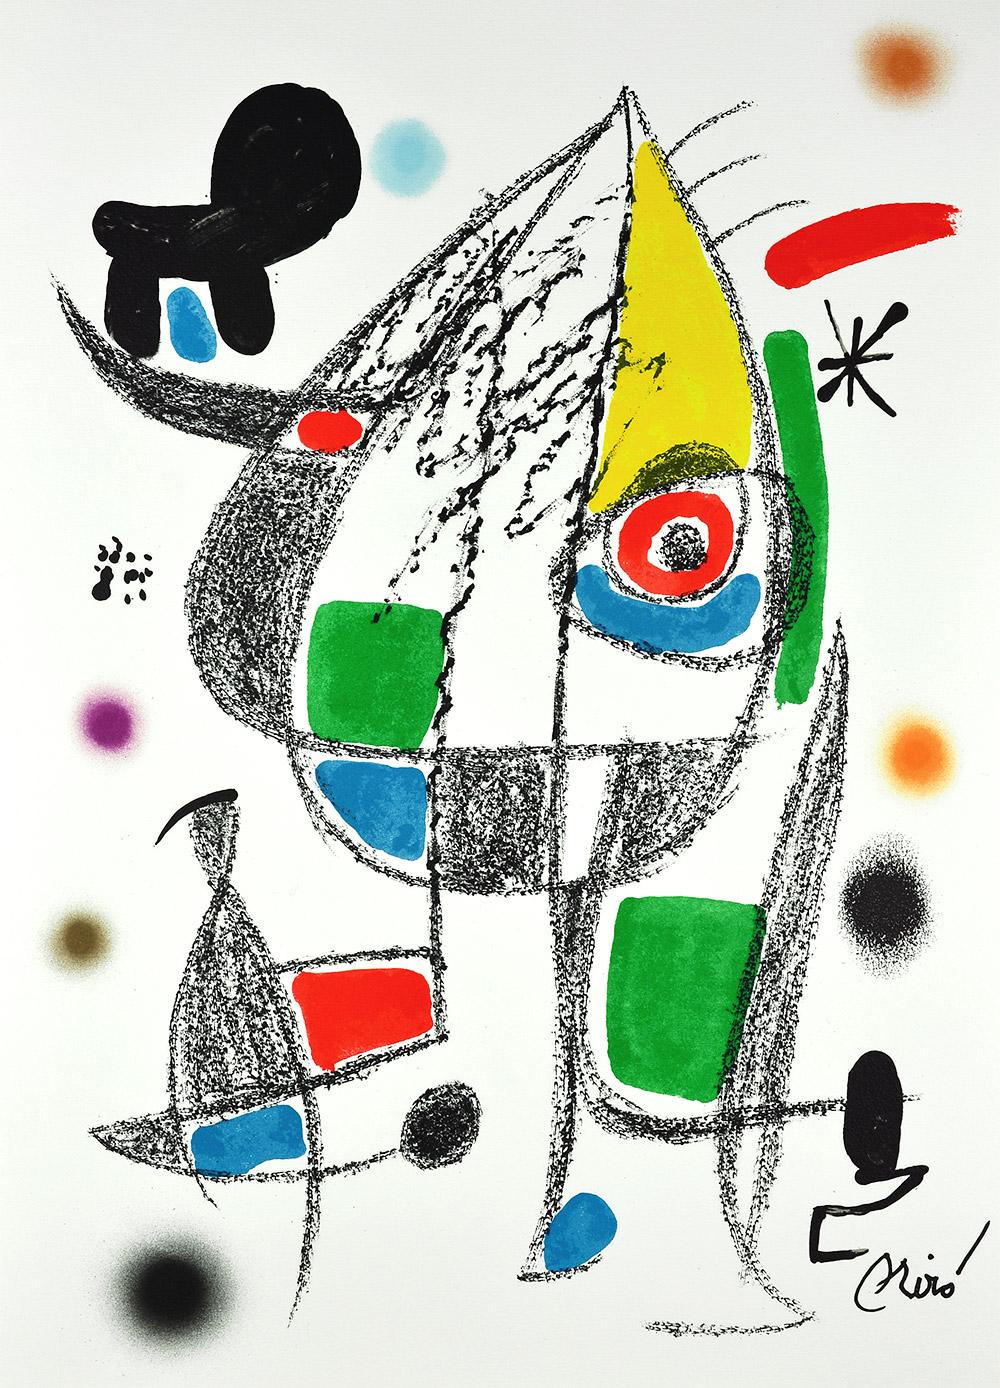 Where can I find Joan Miró’s paintings?